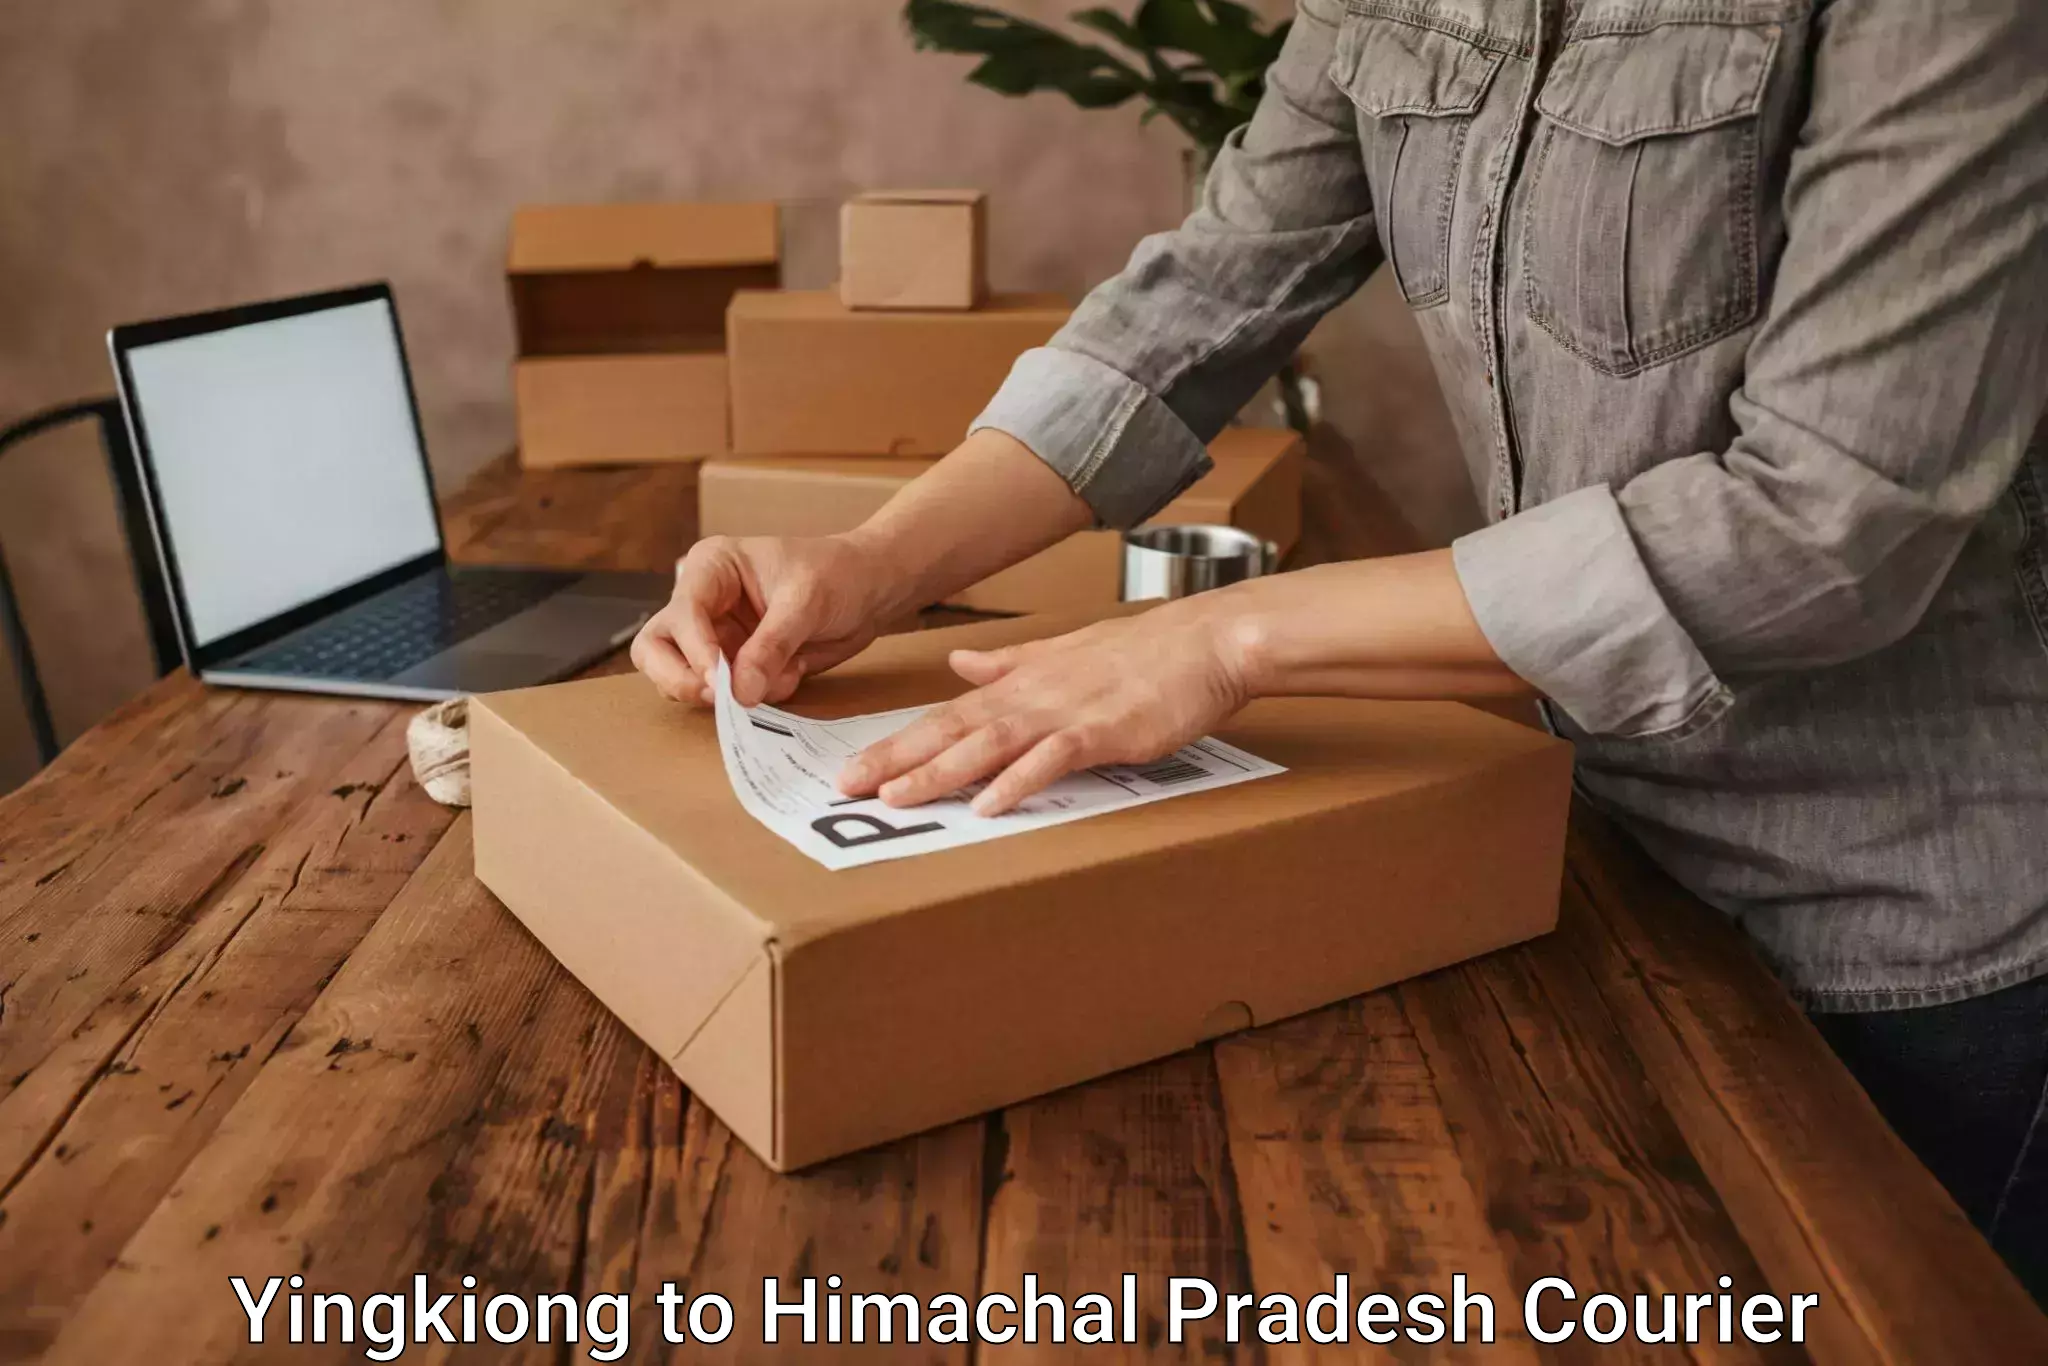 Courier service innovation Yingkiong to Himachal Pradesh